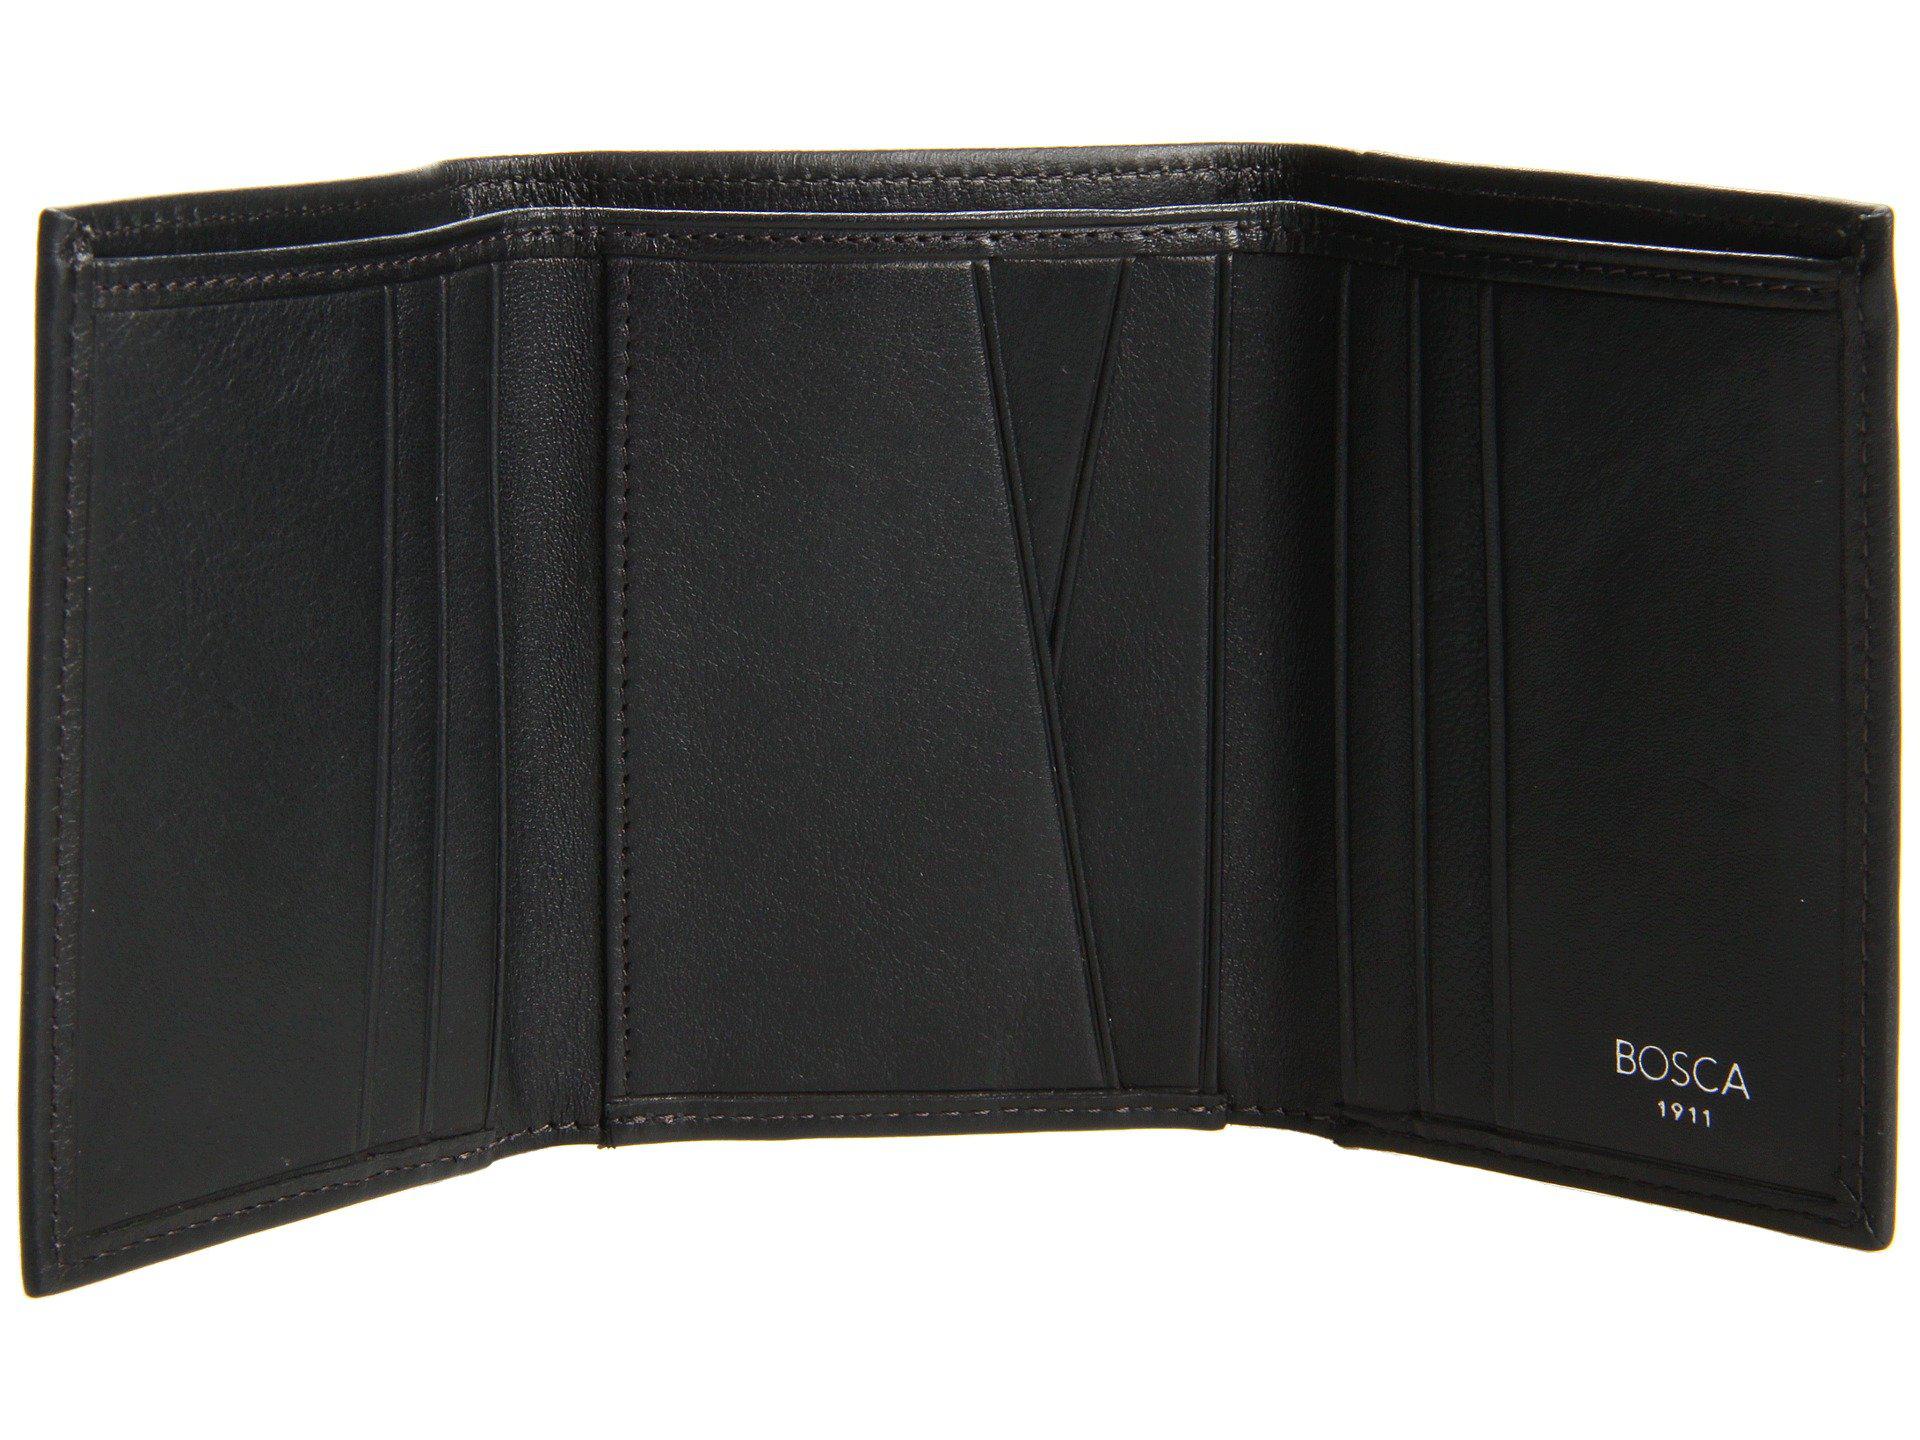 Bosca Leather Nappa Vitello Collection - Trifold Wallet in Black ...